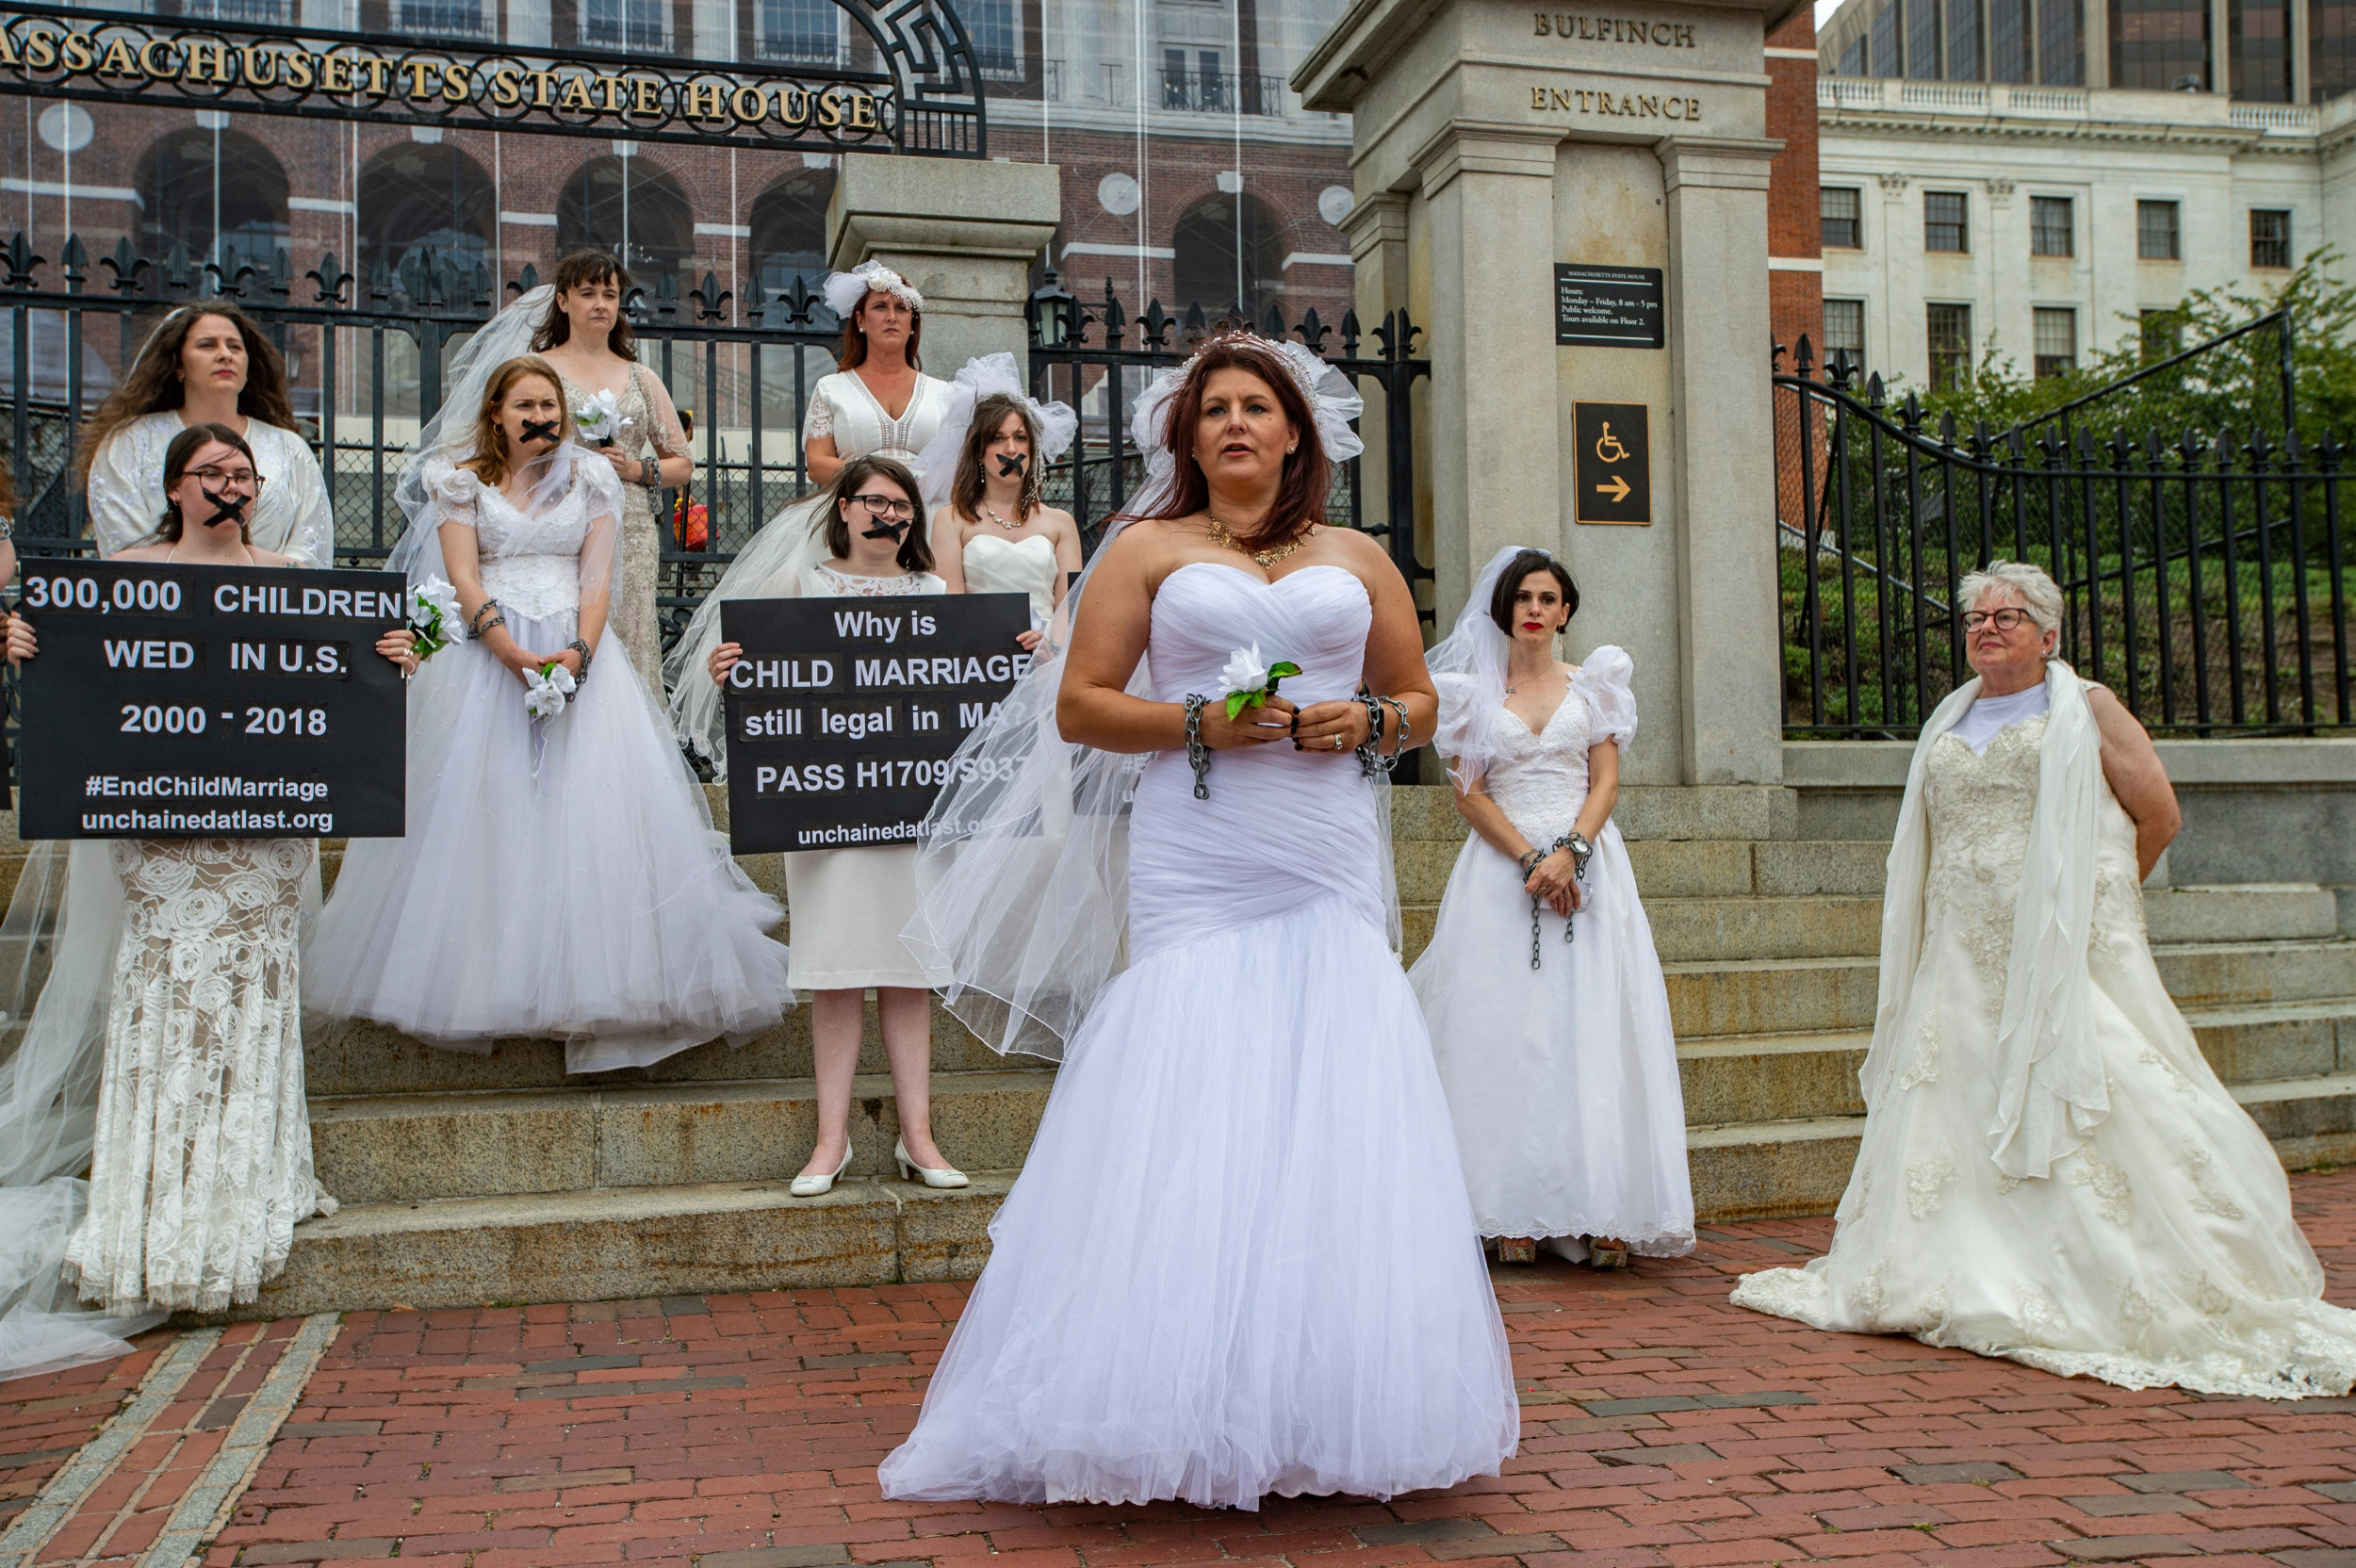 map shows which states allow child marriage as new hampshire bill passes